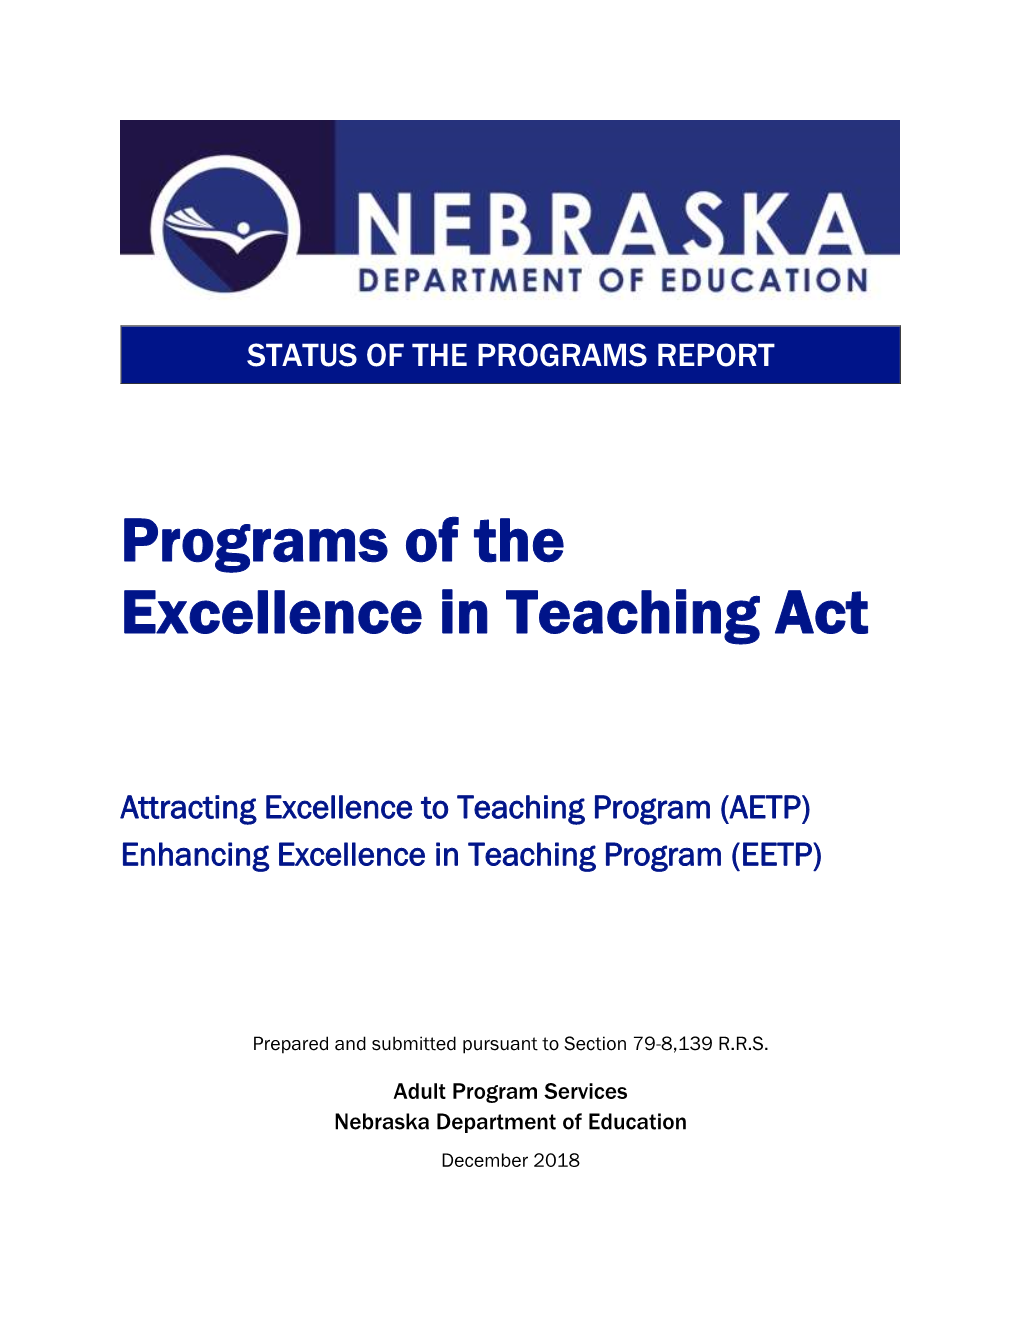 Programs of the Excellence in Teaching Act